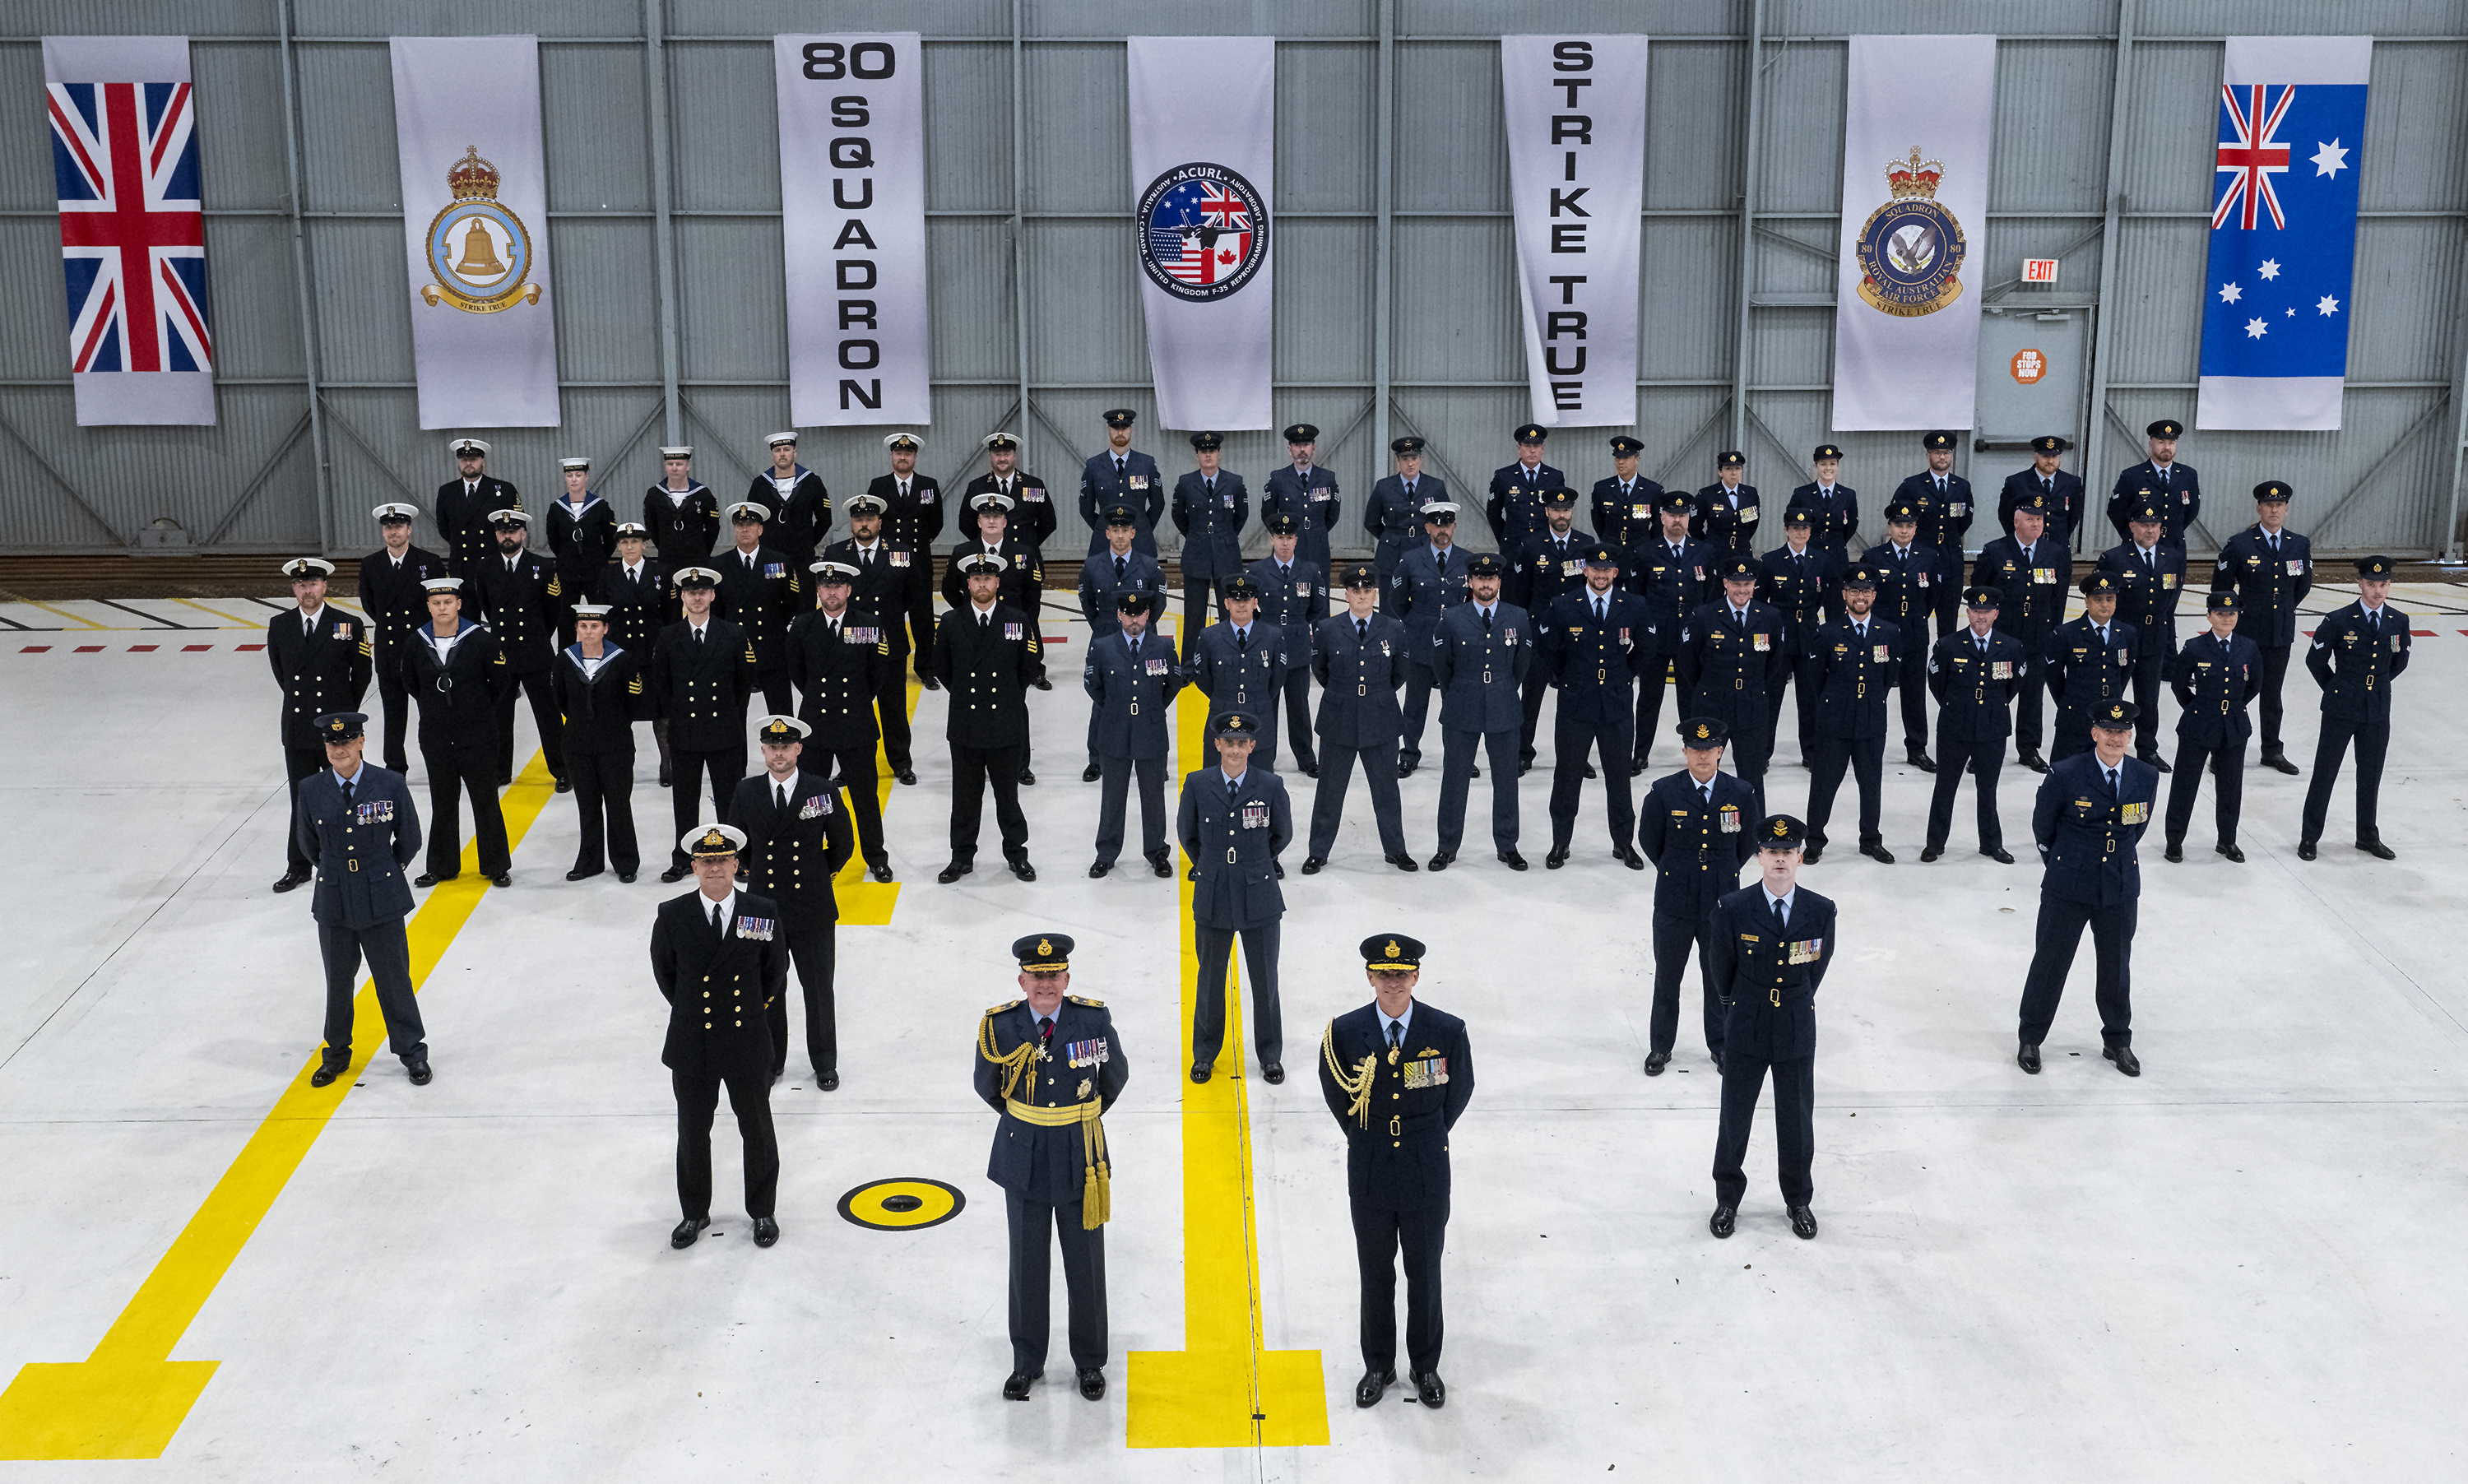 Group shot of personnel formed up in the hangar.